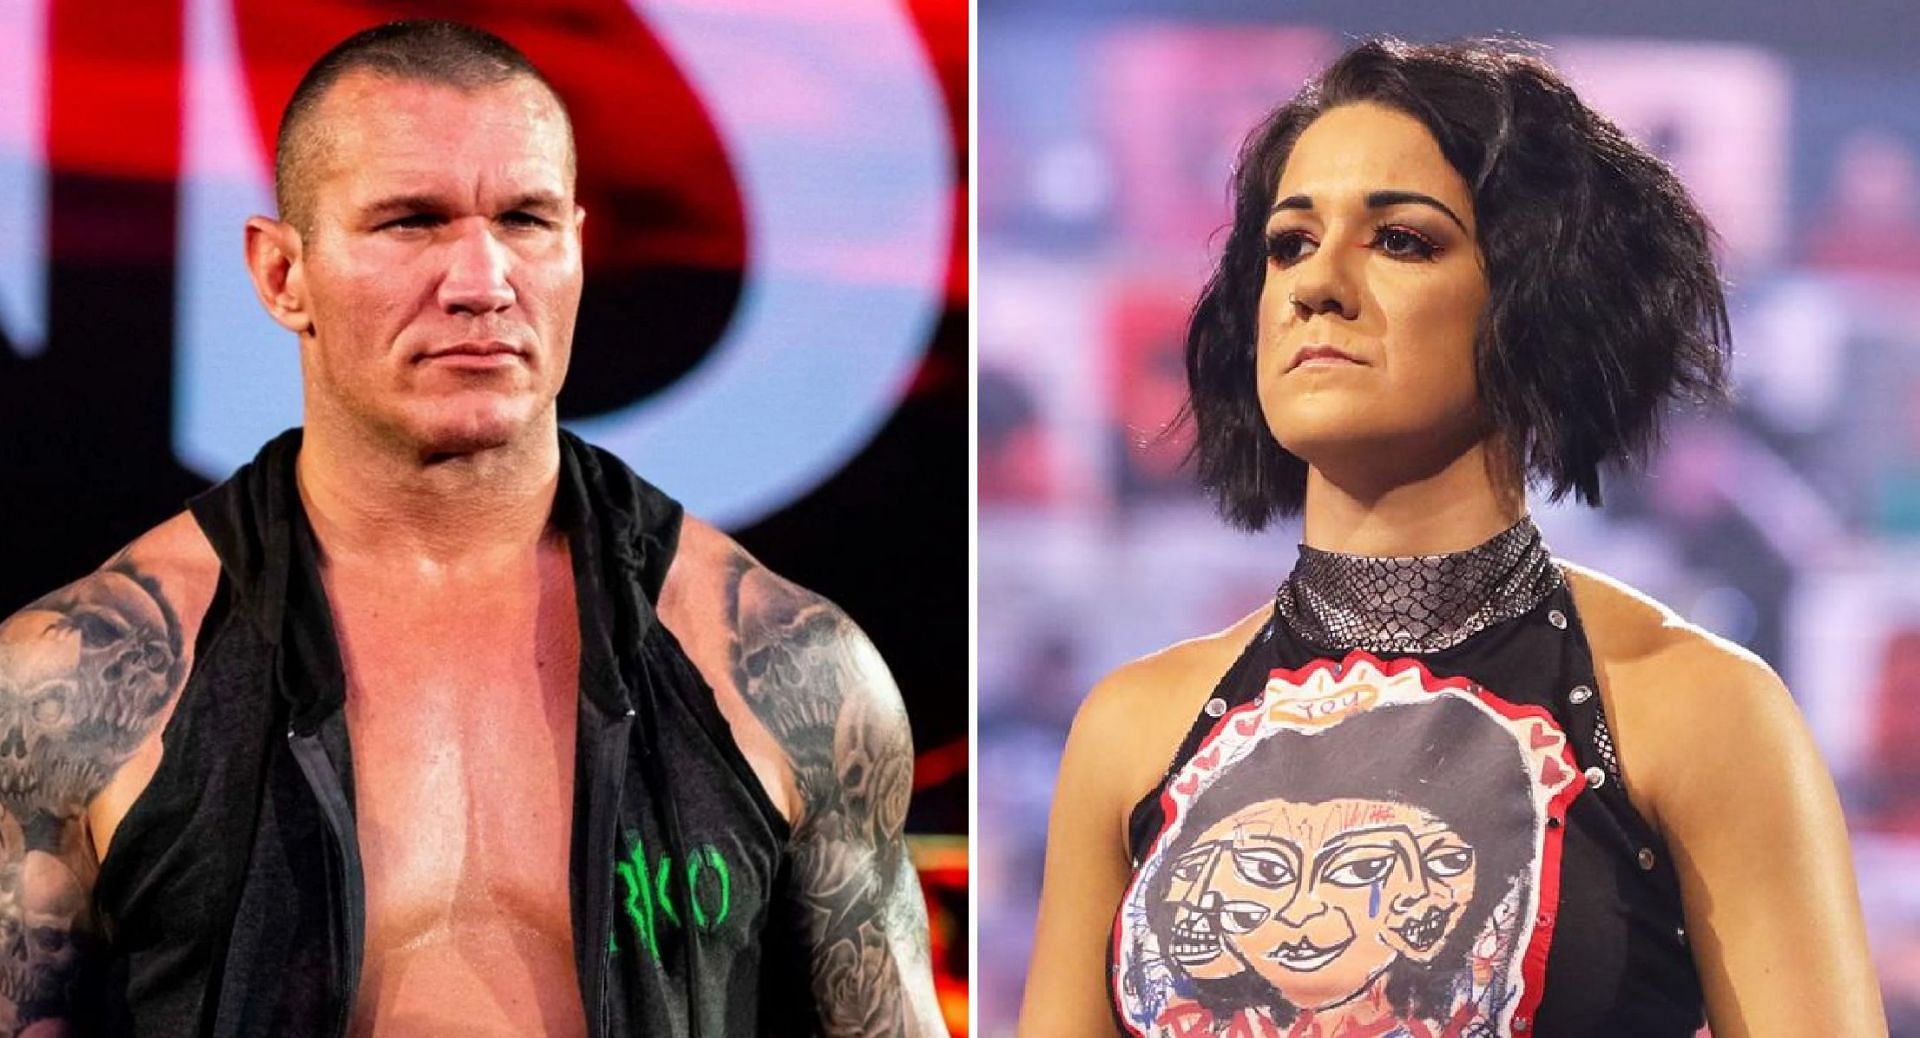 Randy Orton has received major praise from Bayley